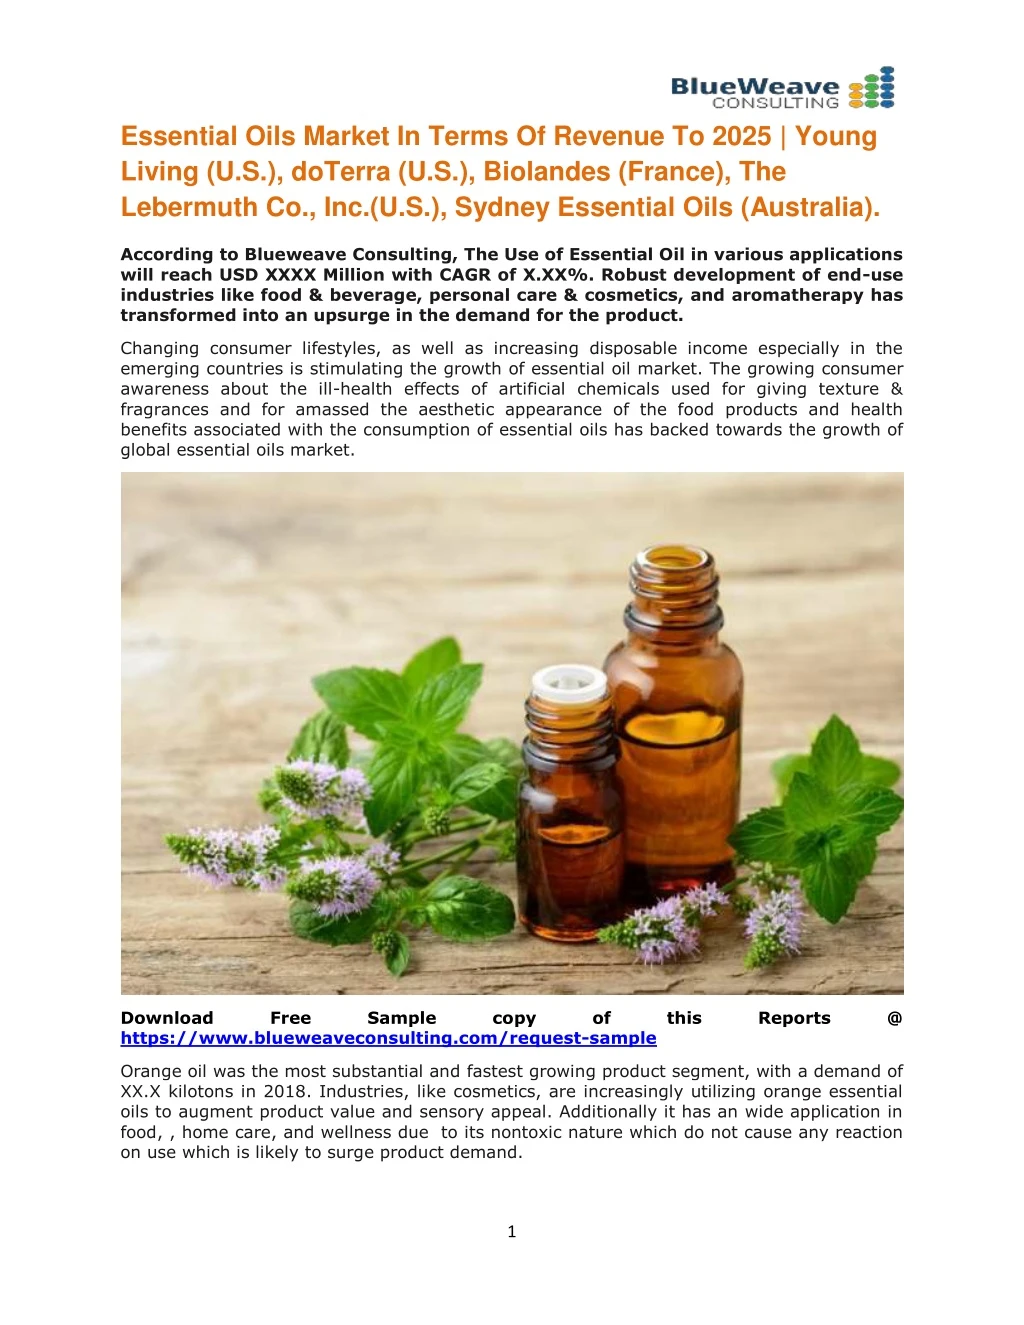 essential oils market in terms of revenue to 2025